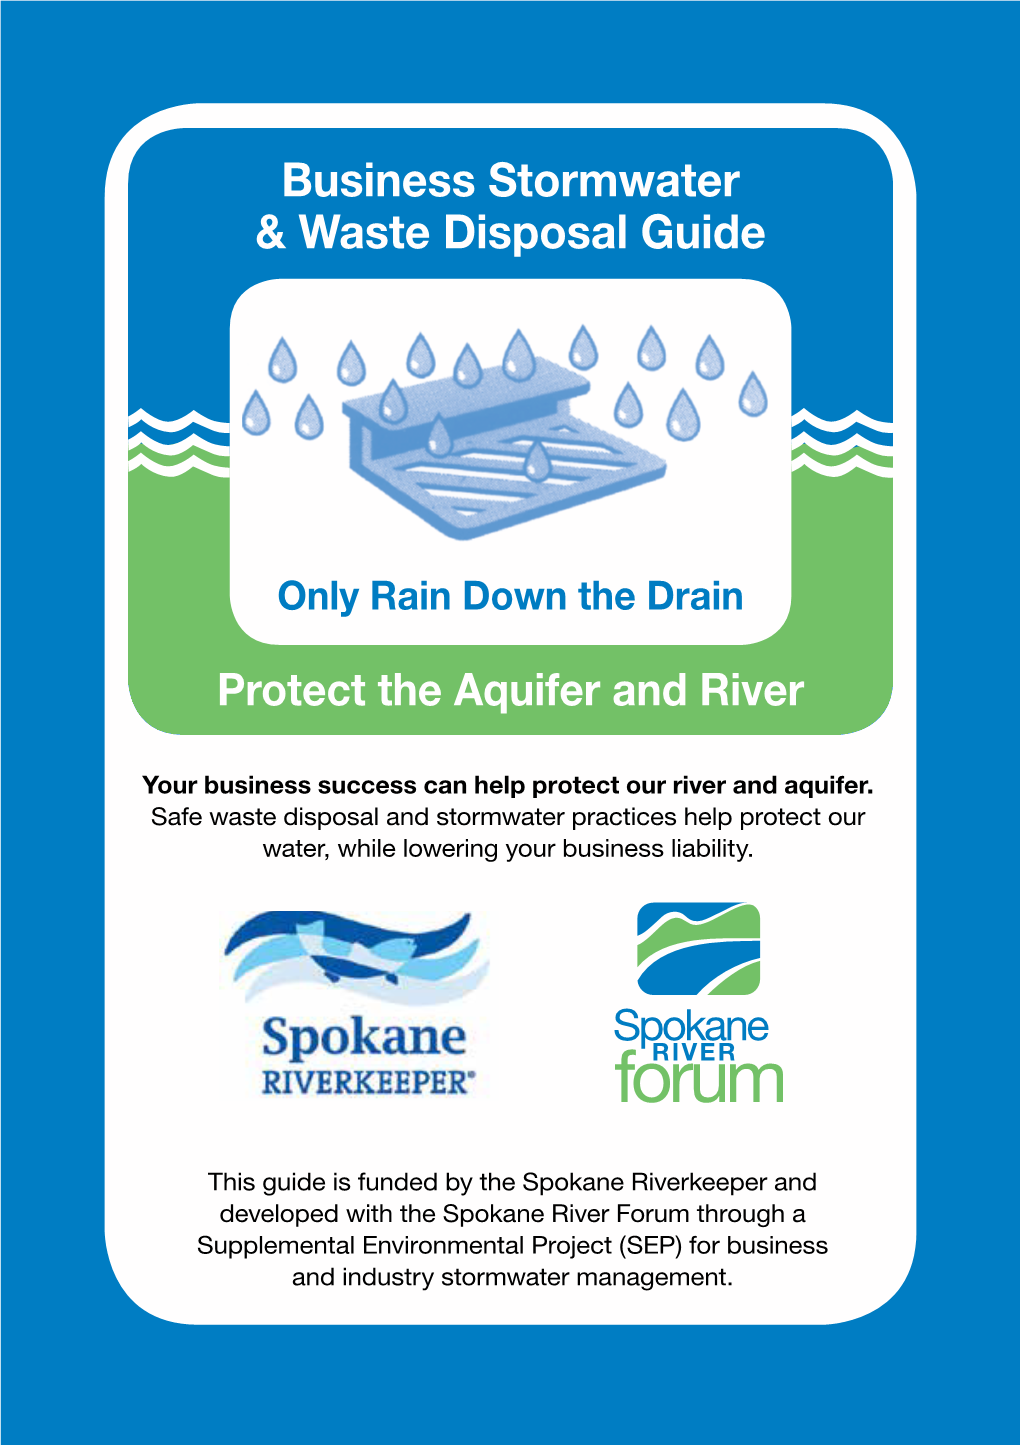 Business Stormwater & Waste Disposal Guide